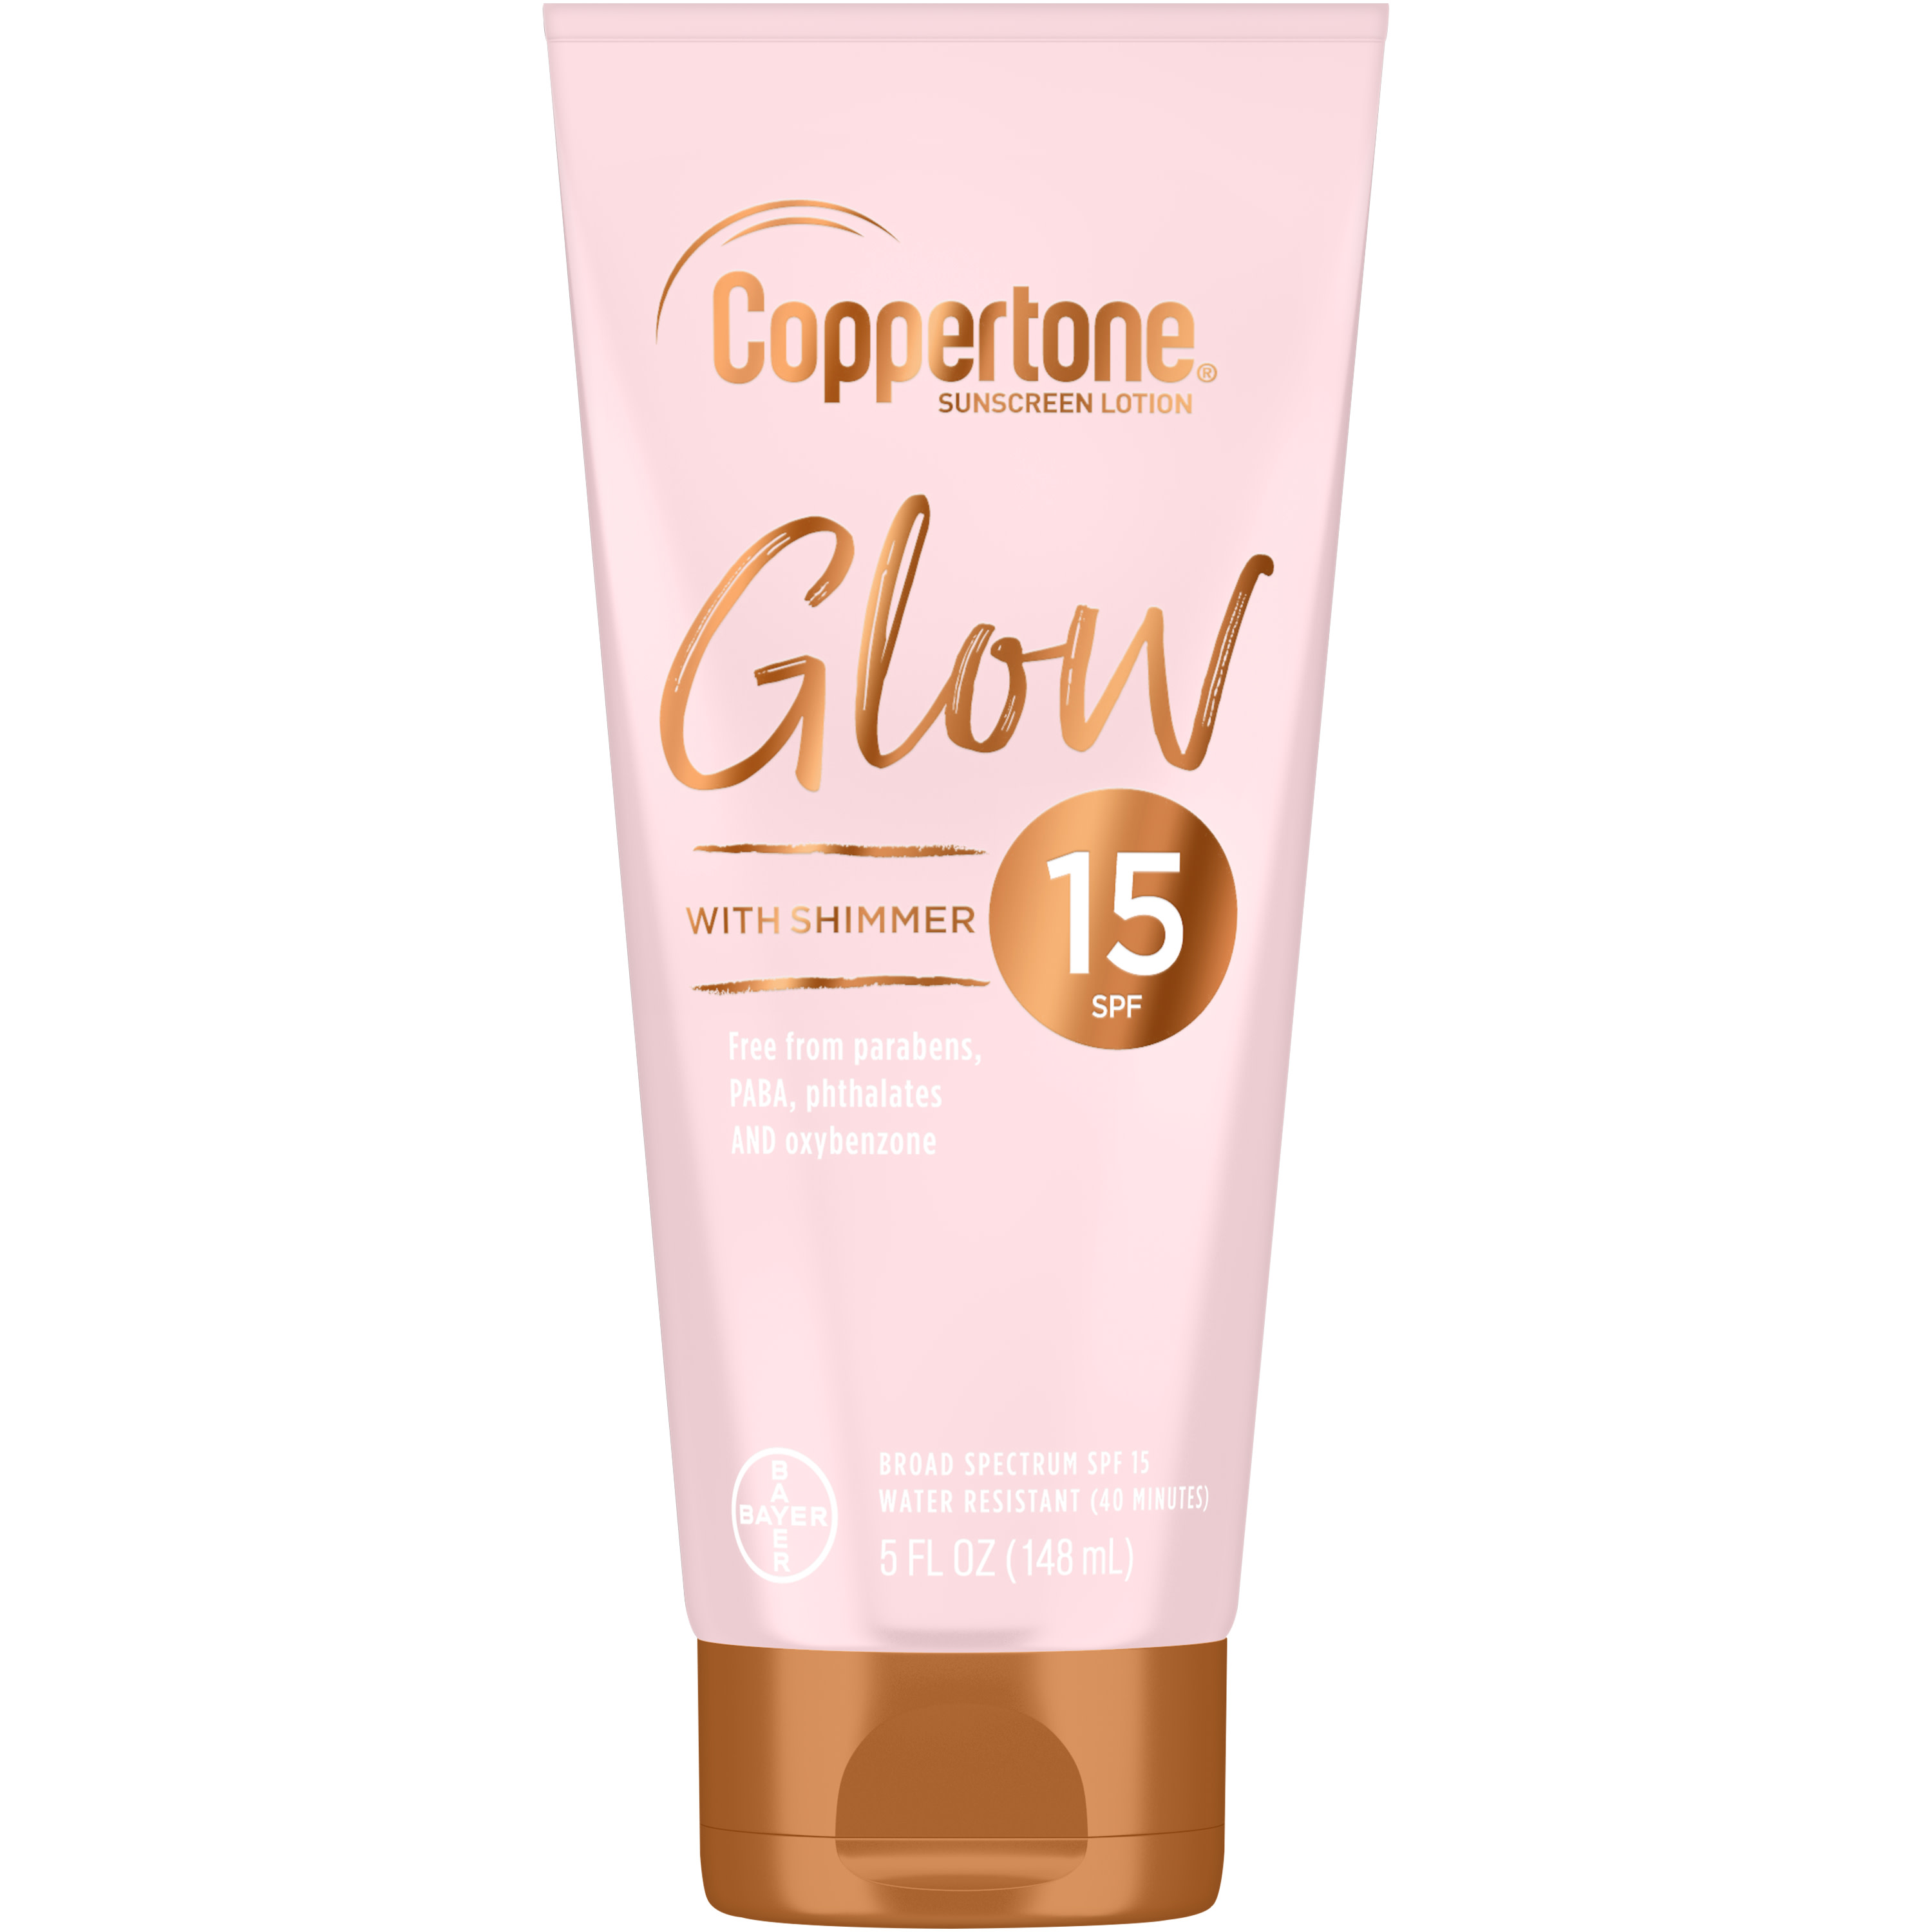 Coppertone Glow Shimmering Sunscreen Lotion with Broad Spectrum SPF 15, 5 oz - image 2 of 6